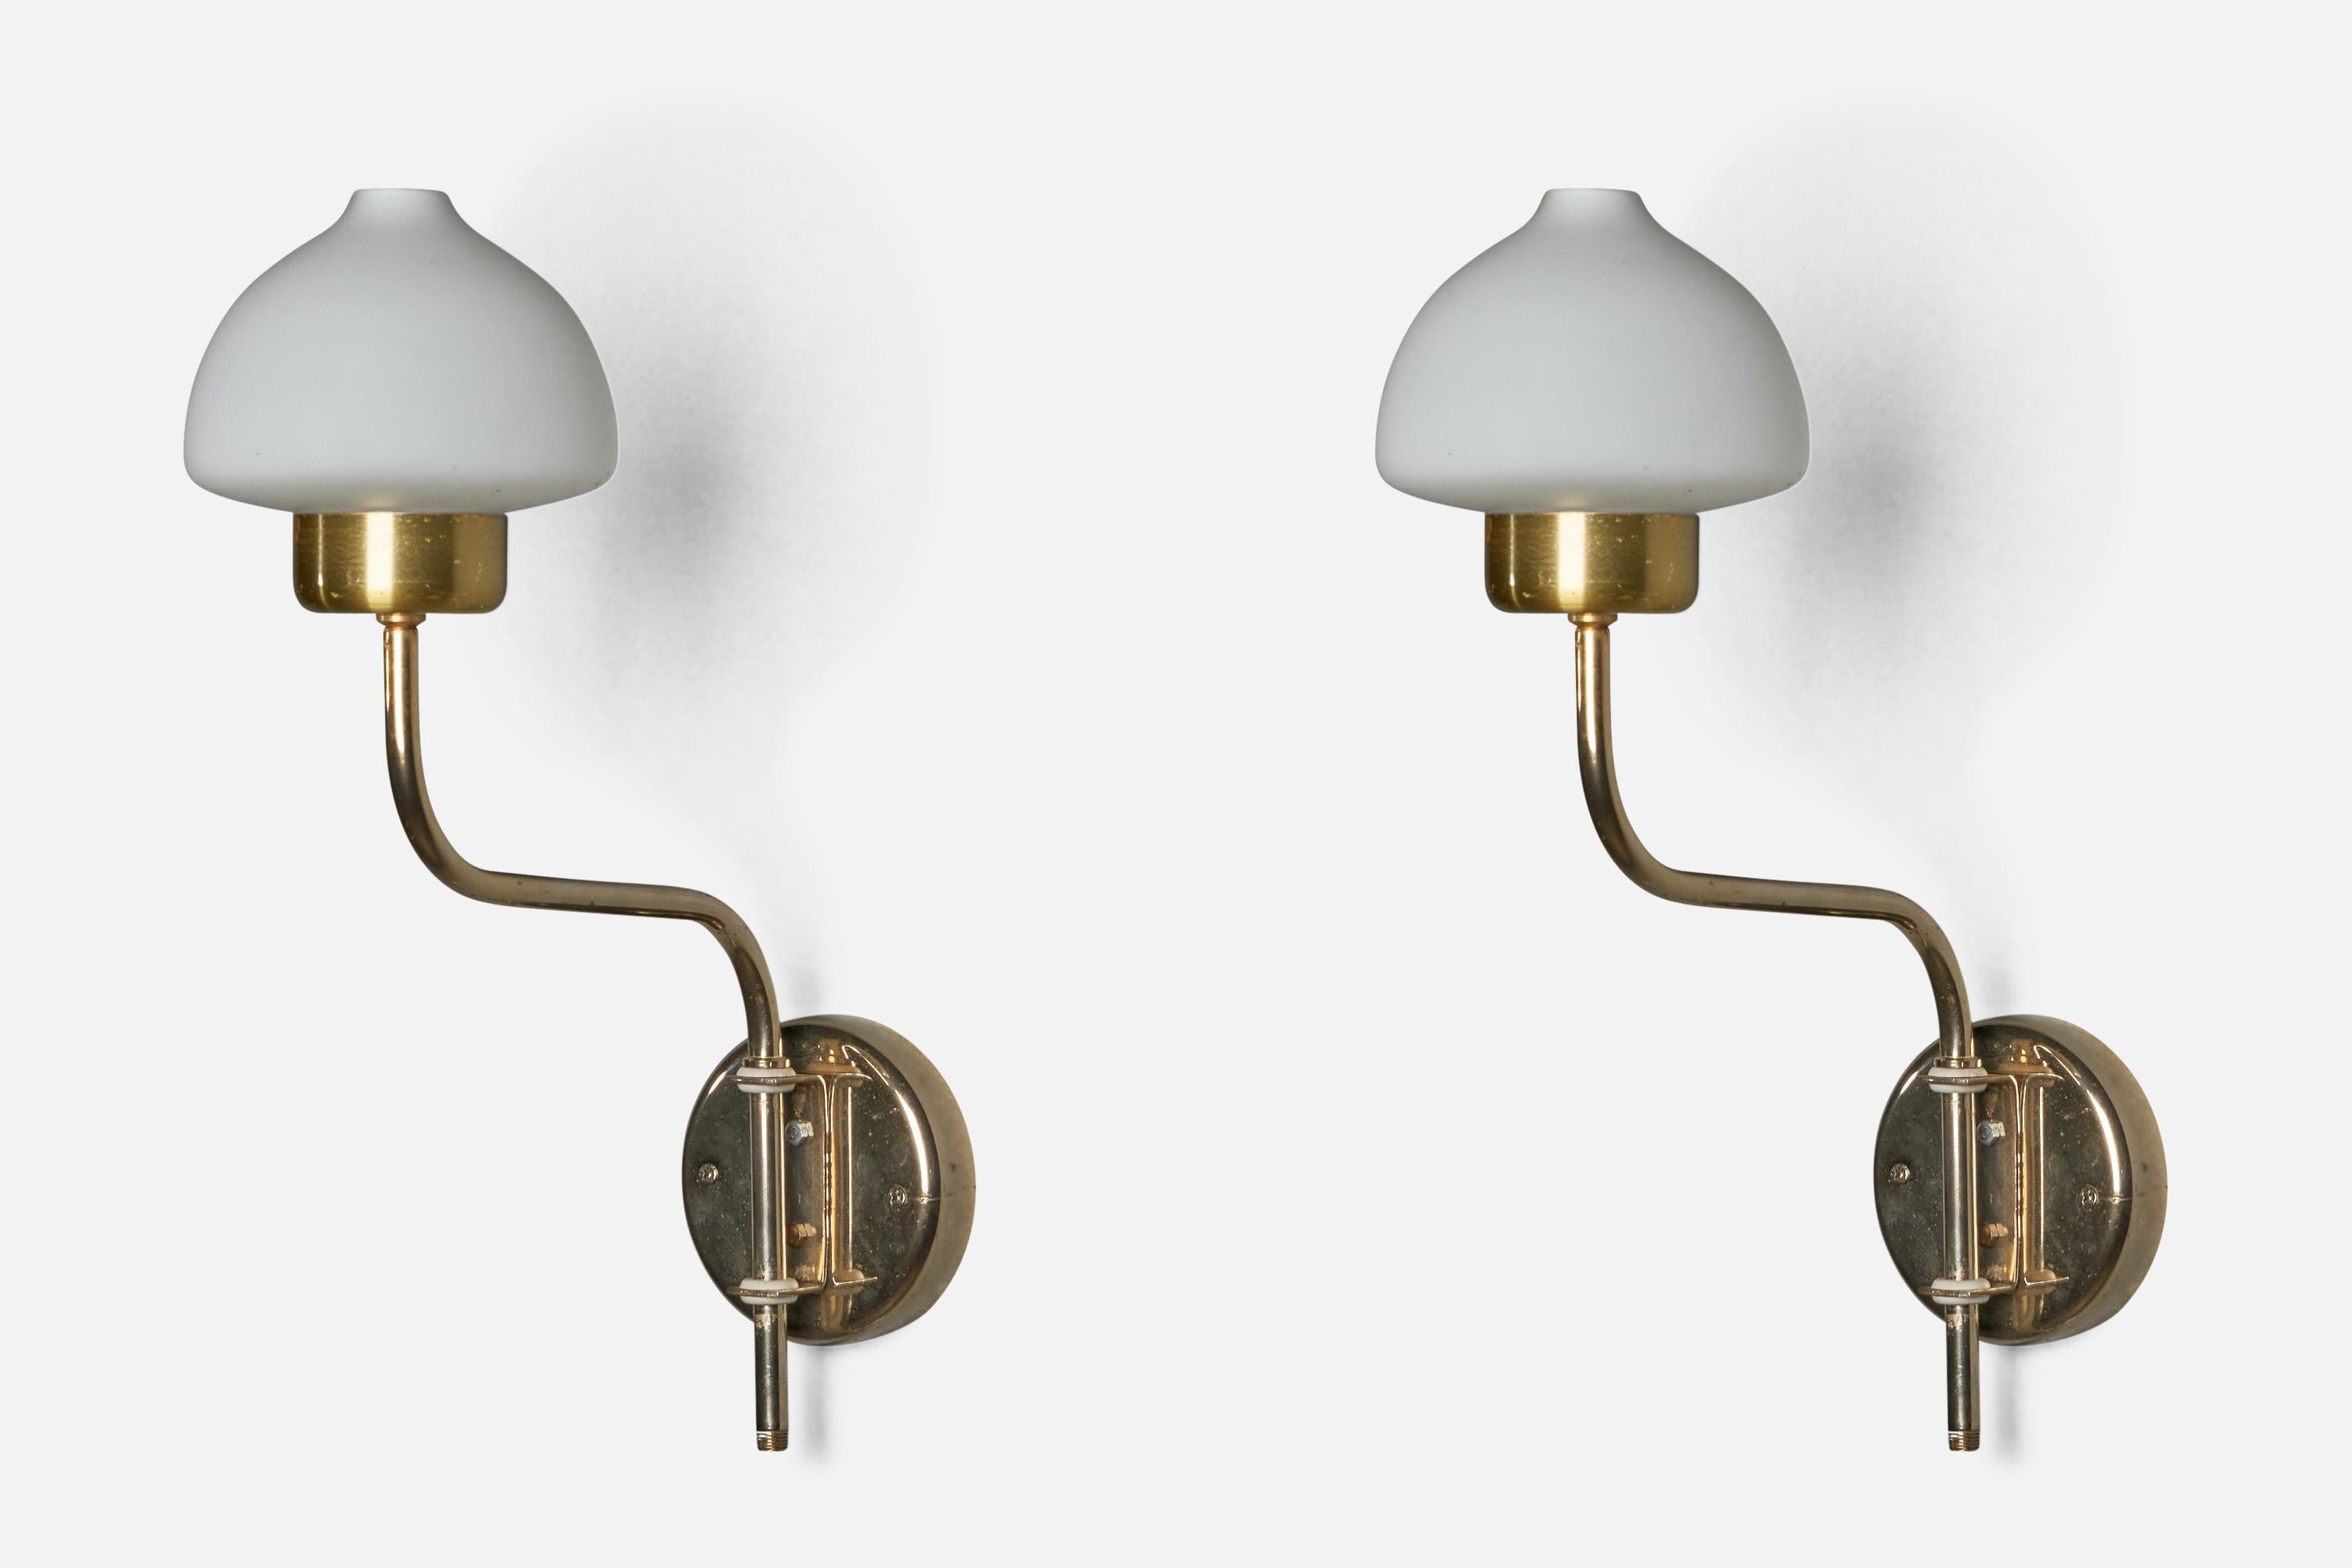 A pair of adjustable brass and opaline glass wall lights designed and produced in Sweden, 1970s.

Please note cord feeds from bottom of stem via plug-in, not convertible to hard wire.

Overall Dimensions (inches): 15” H x 4.75” W x 10.5” D
Bulb